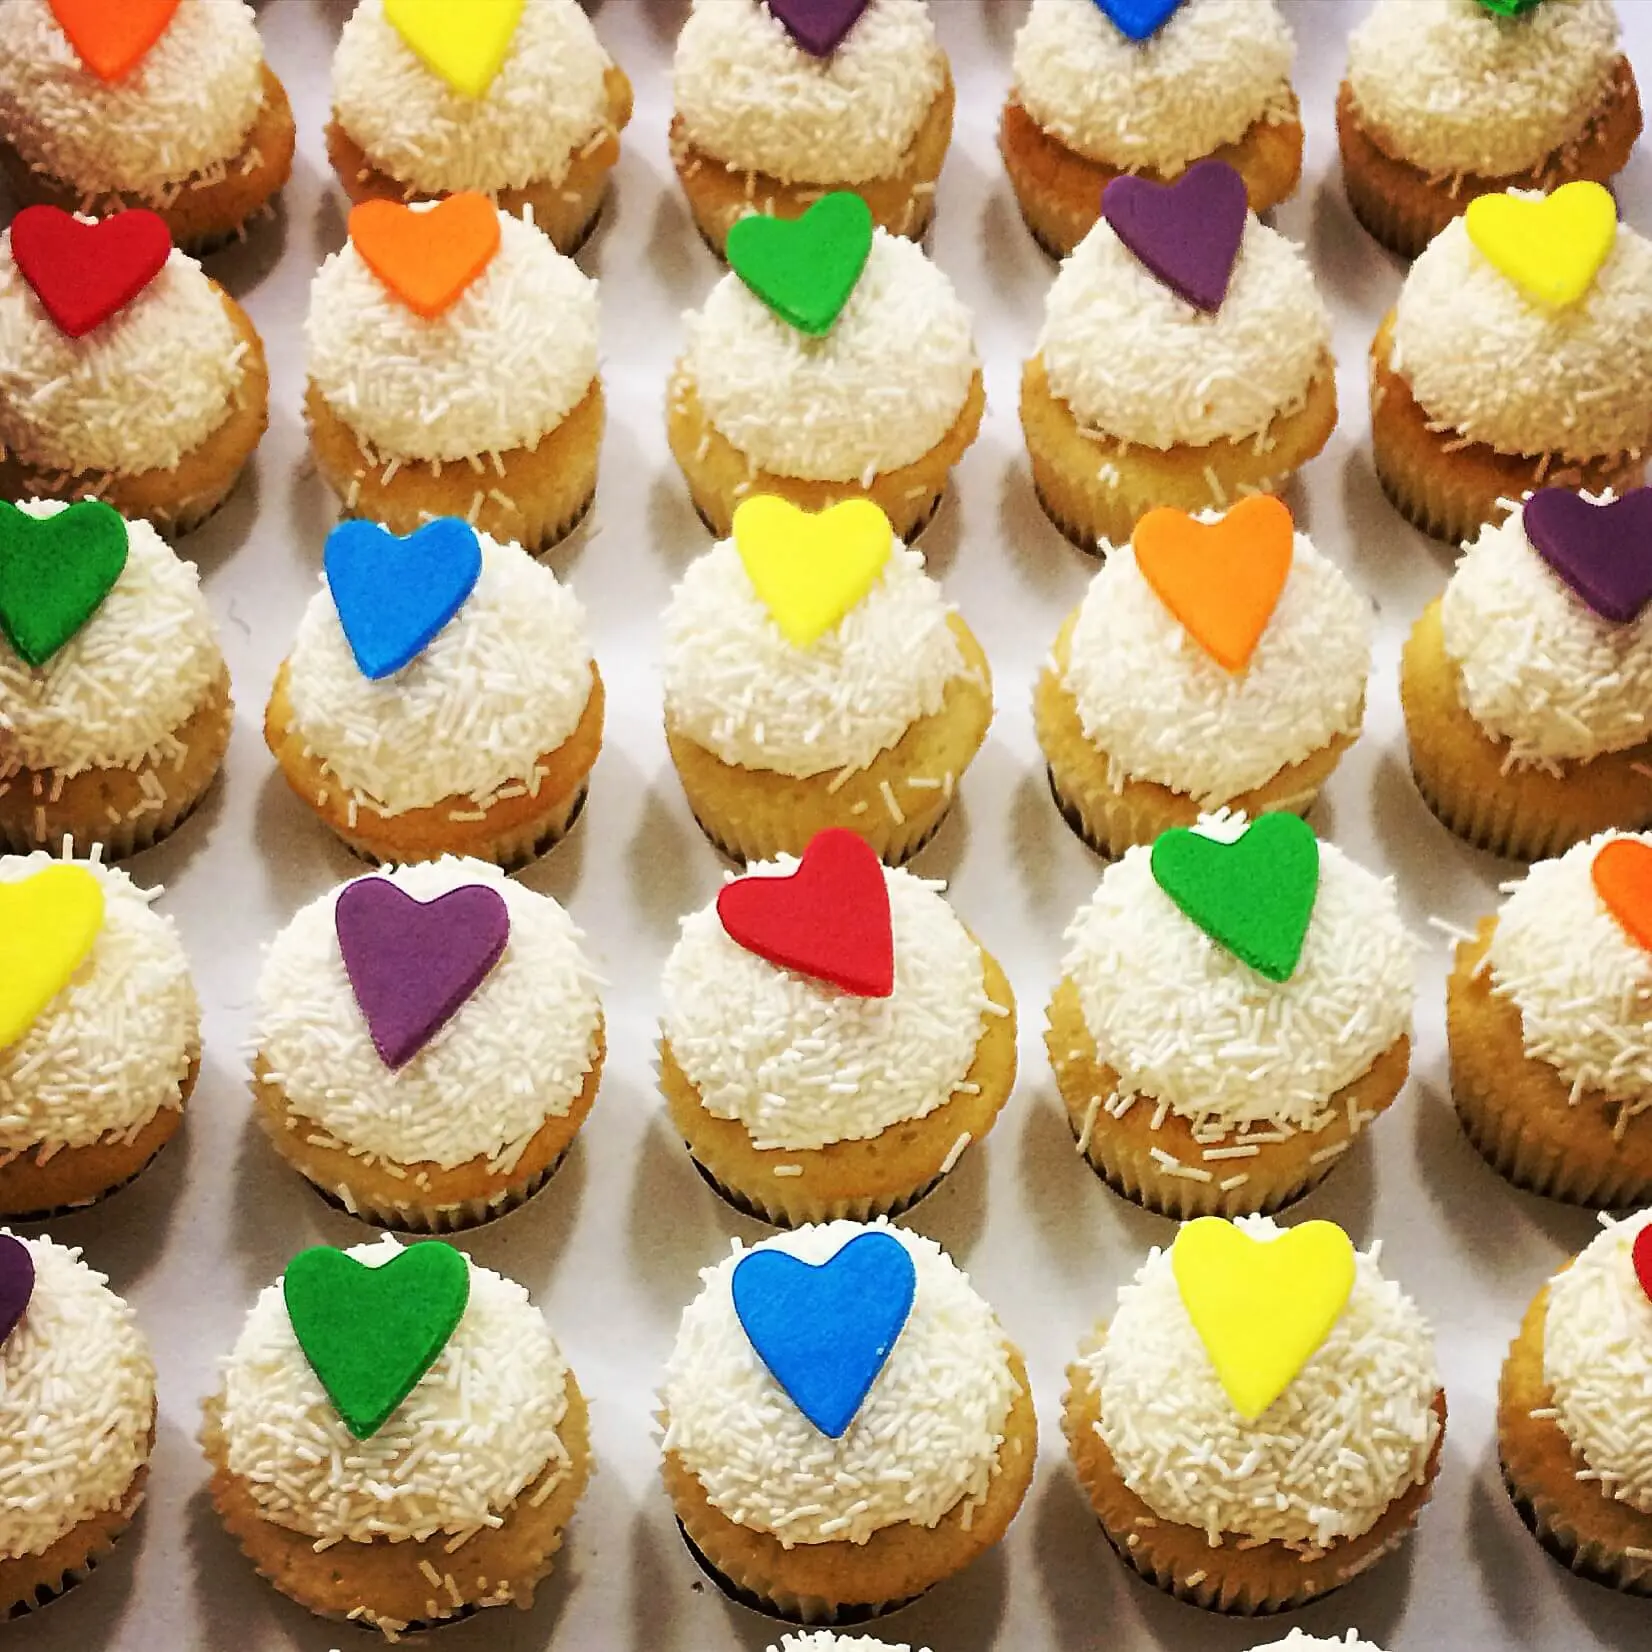 Optimizely pride cupcakes